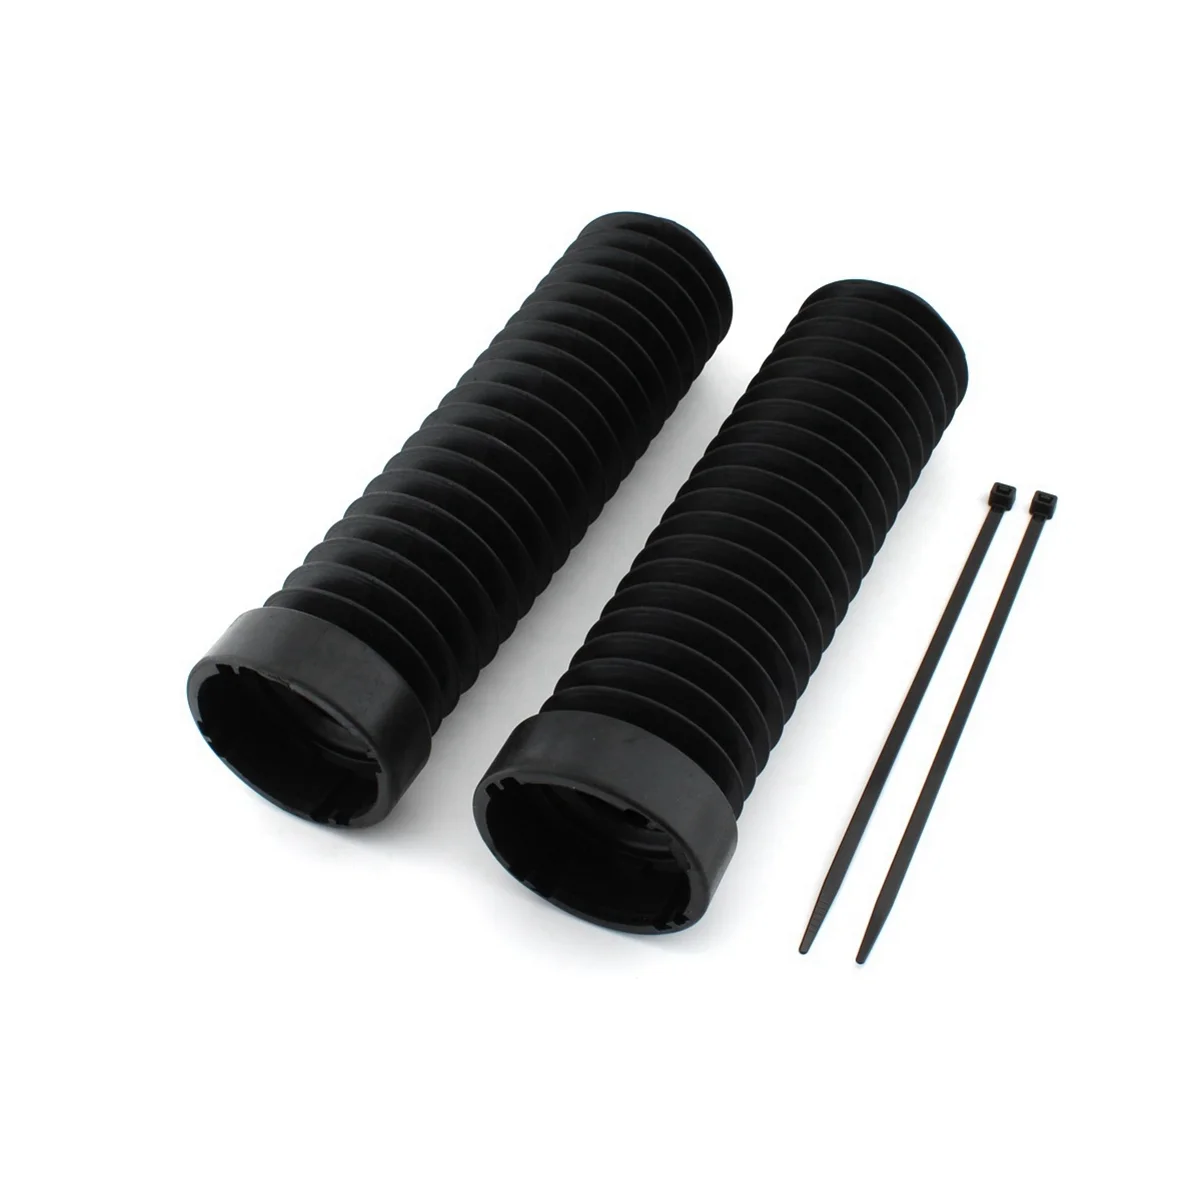 

Front Fork Shock Dust Covers Gaiters Rubber for ATC 250R 1983-1986 350X ATC -1987 Dirt Bike Black